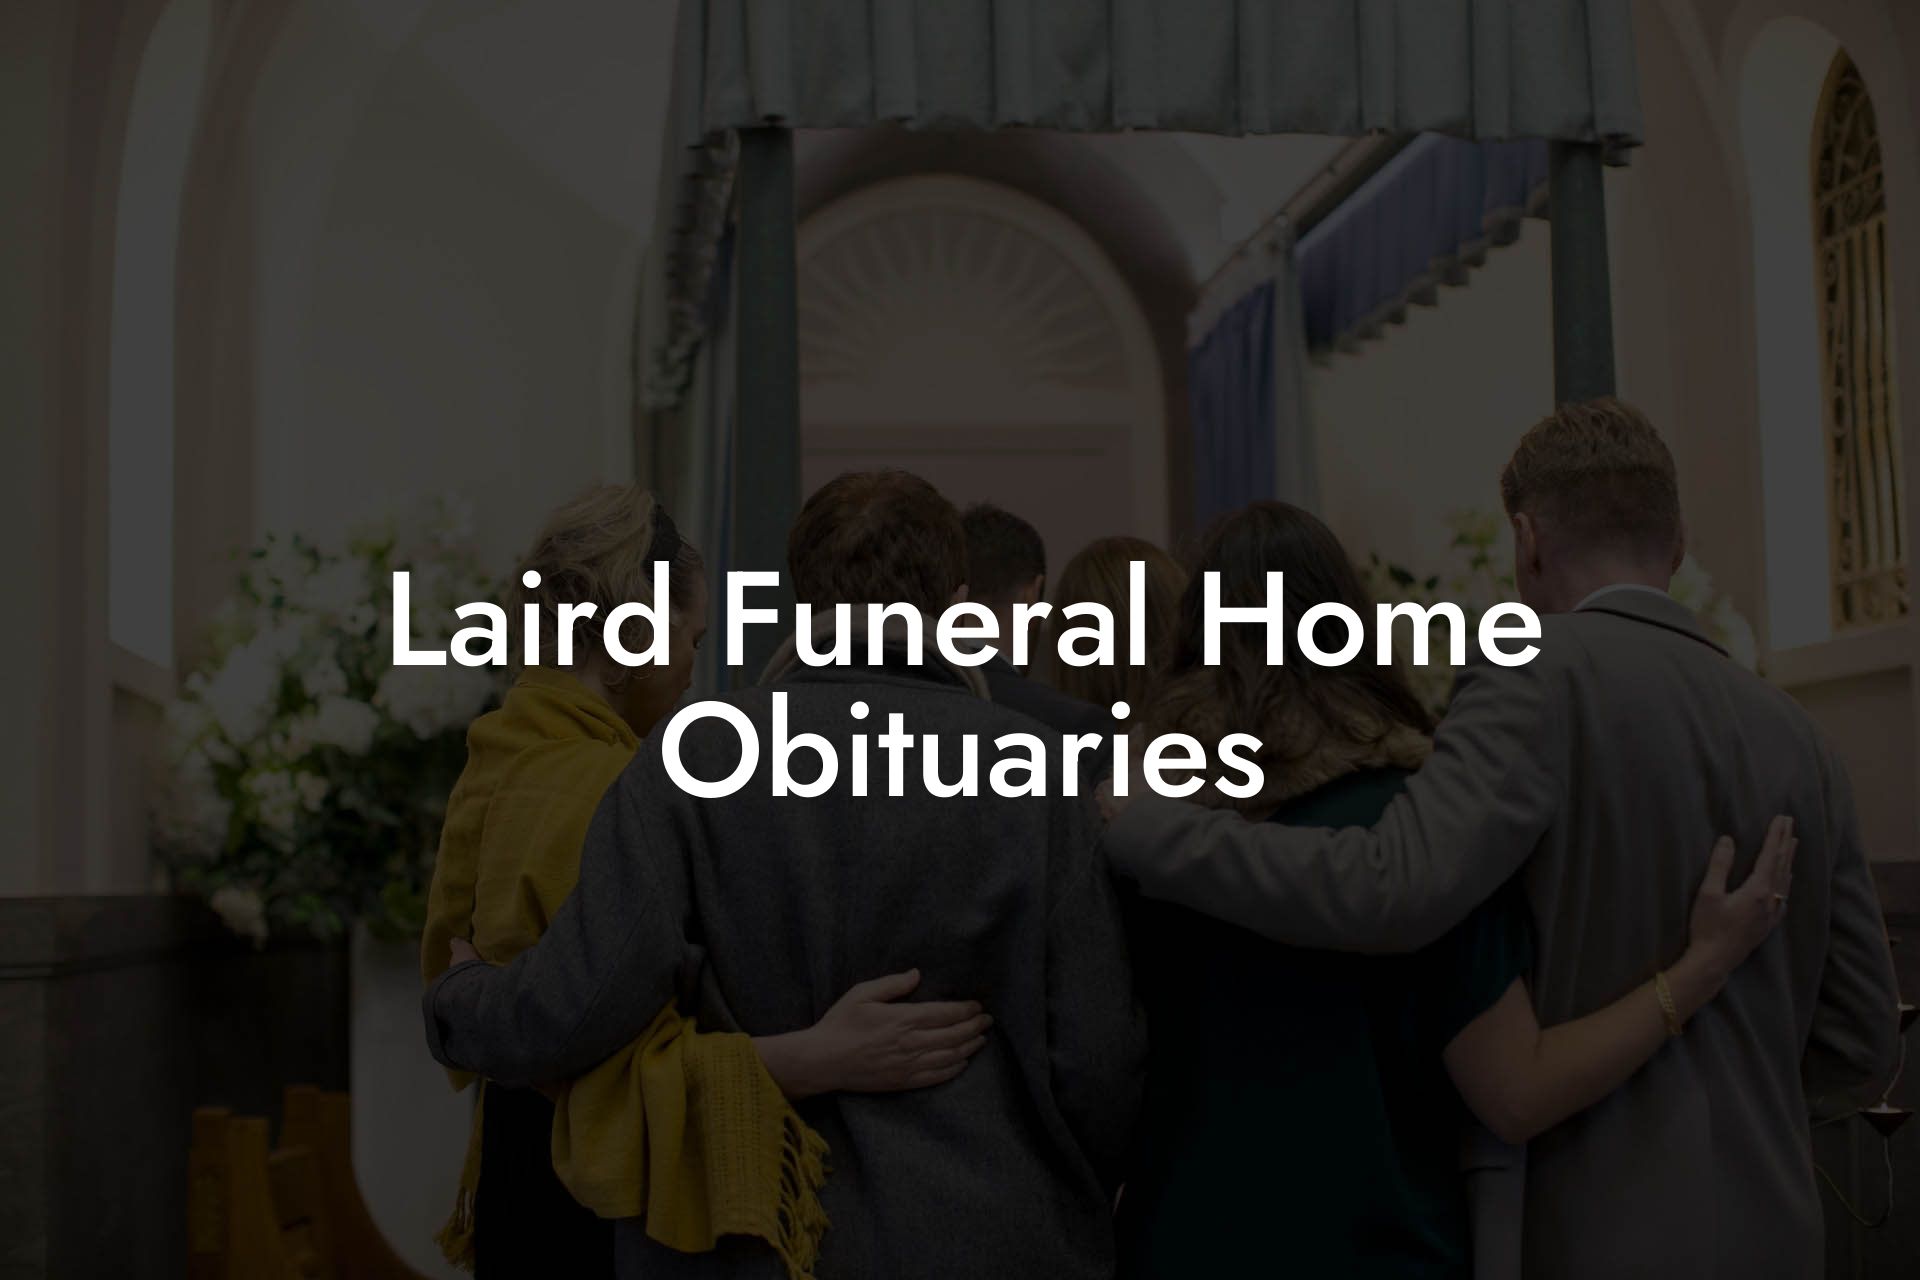 Laird Funeral Home Obituaries